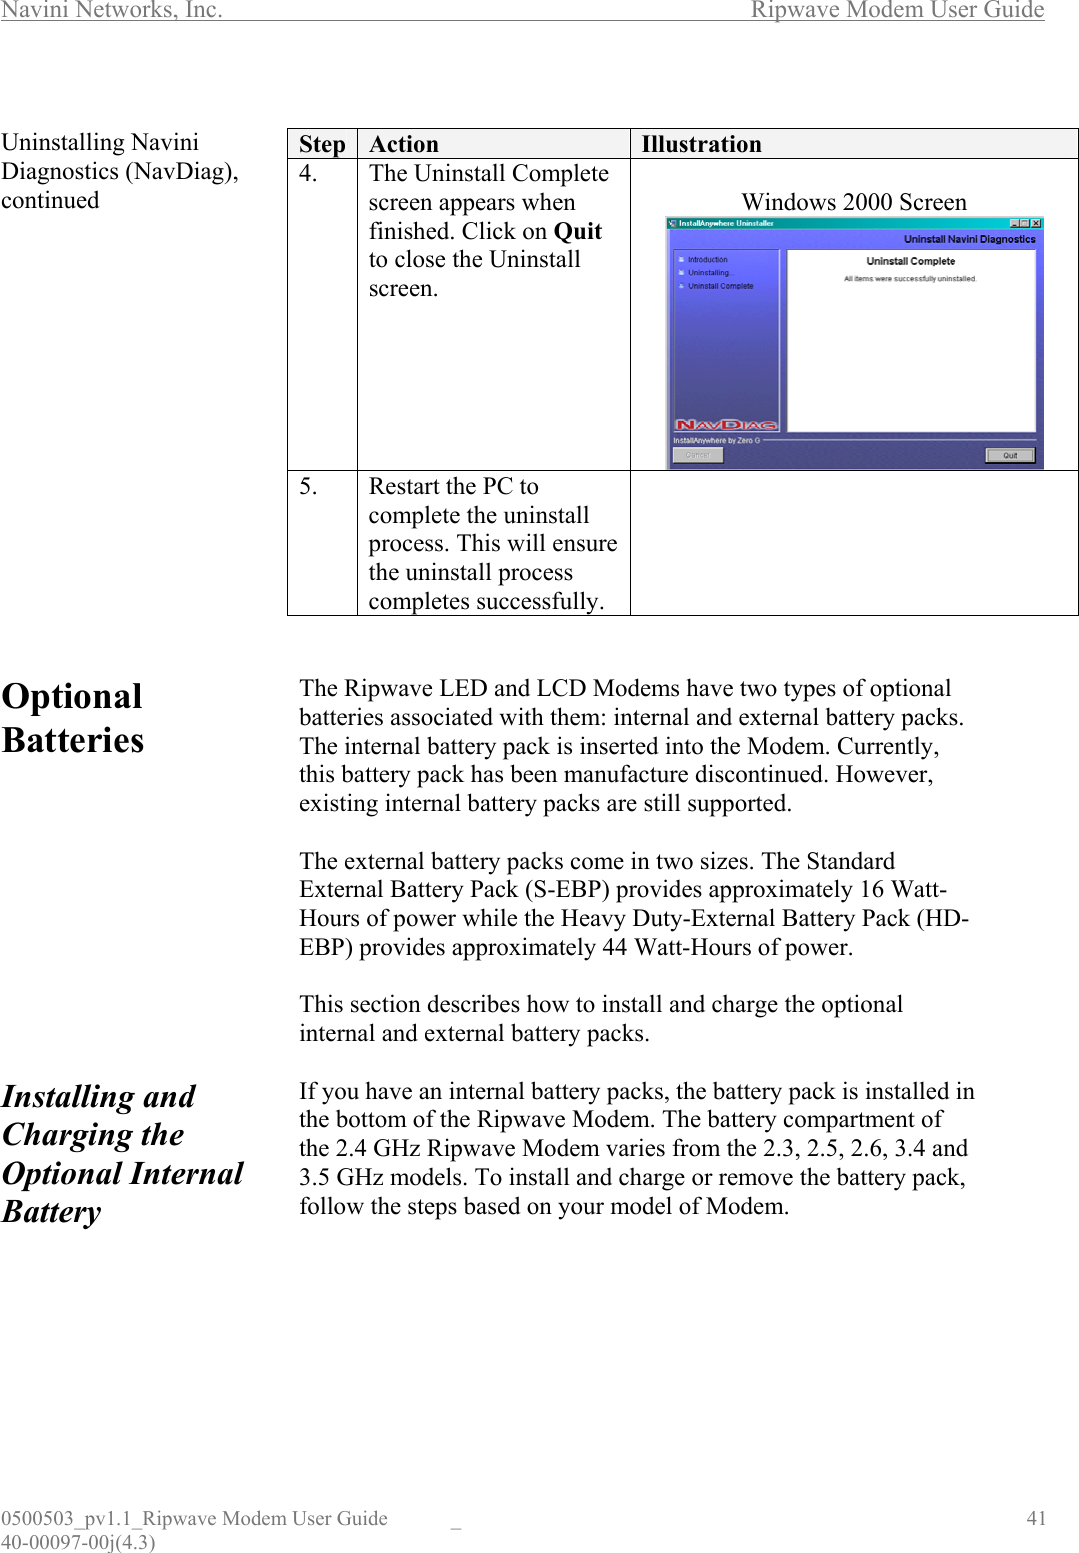 Navini Networks, Inc.        Ripwave Modem User Guide 0500503_pv1.1_Ripwave Modem User Guide  _                                    41 40-00097-00j(4.3)  Uninstalling Navini Diagnostics (NavDiag), continued                 Optional Batteries            Installing and Charging the Optional Internal Battery         Step  Action  Illustration 4.  The Uninstall Complete screen appears when finished. Click on Quit to close the Uninstall screen.  Windows 2000 Screen   5.  Restart the PC to complete the uninstall process. This will ensure the uninstall process completes successfully.    The Ripwave LED and LCD Modems have two types of optional batteries associated with them: internal and external battery packs. The internal battery pack is inserted into the Modem. Currently, this battery pack has been manufacture discontinued. However, existing internal battery packs are still supported.   The external battery packs come in two sizes. The Standard External Battery Pack (S-EBP) provides approximately 16 Watt-Hours of power while the Heavy Duty-External Battery Pack (HD-EBP) provides approximately 44 Watt-Hours of power.   This section describes how to install and charge the optional internal and external battery packs.  If you have an internal battery packs, the battery pack is installed in the bottom of the Ripwave Modem. The battery compartment of the 2.4 GHz Ripwave Modem varies from the 2.3, 2.5, 2.6, 3.4 and 3.5 GHz models. To install and charge or remove the battery pack, follow the steps based on your model of Modem.      